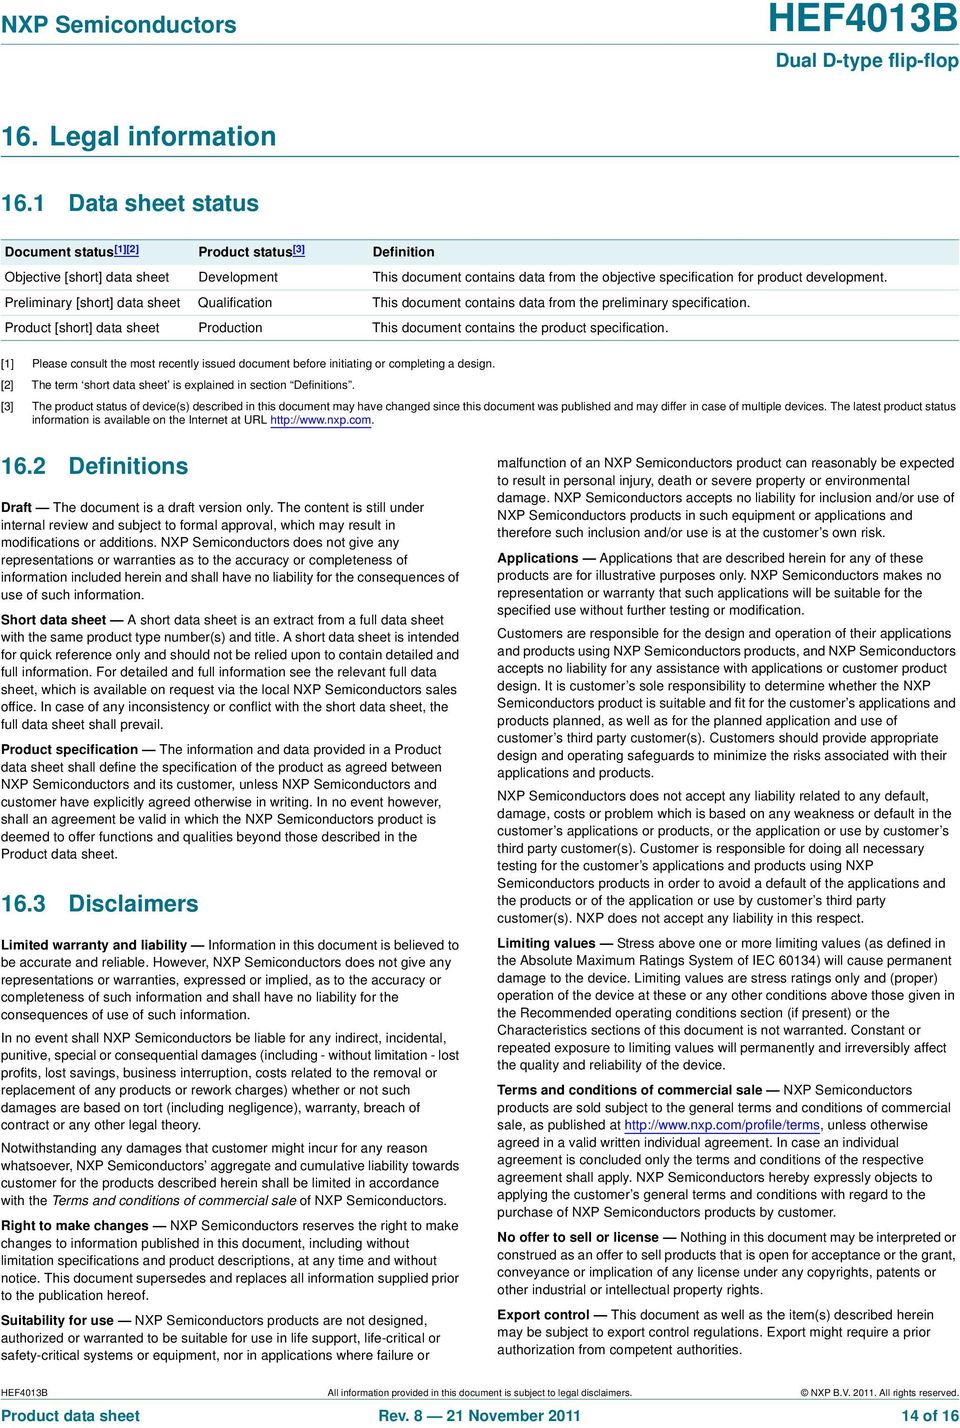 Preliminary [short] data sheet ualification This document contains data from the preliminary specification. Product [short] data sheet Production This document contains the product specification.